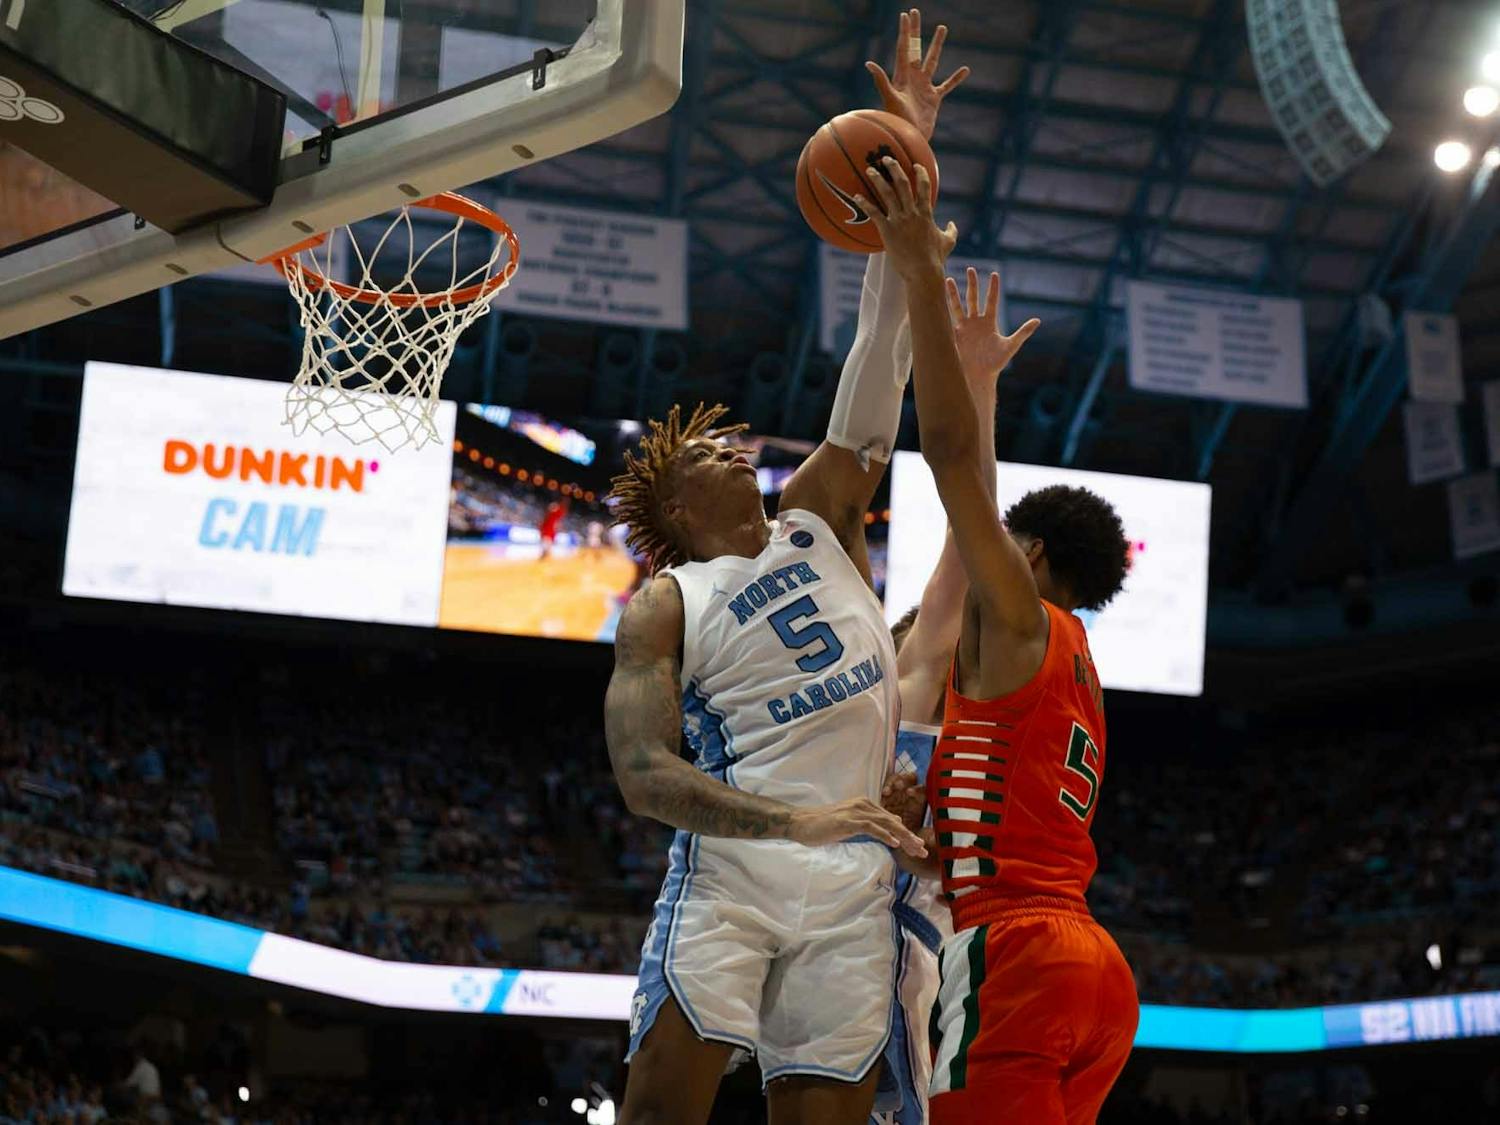 First-year forward Armando Bacot (5) attempts to block a free throw from UM's first-year guard Harlond Beverly (5) in the Smith Center on Saturday, Jan. 25, 2020. UNC defeated Miami 94-71.